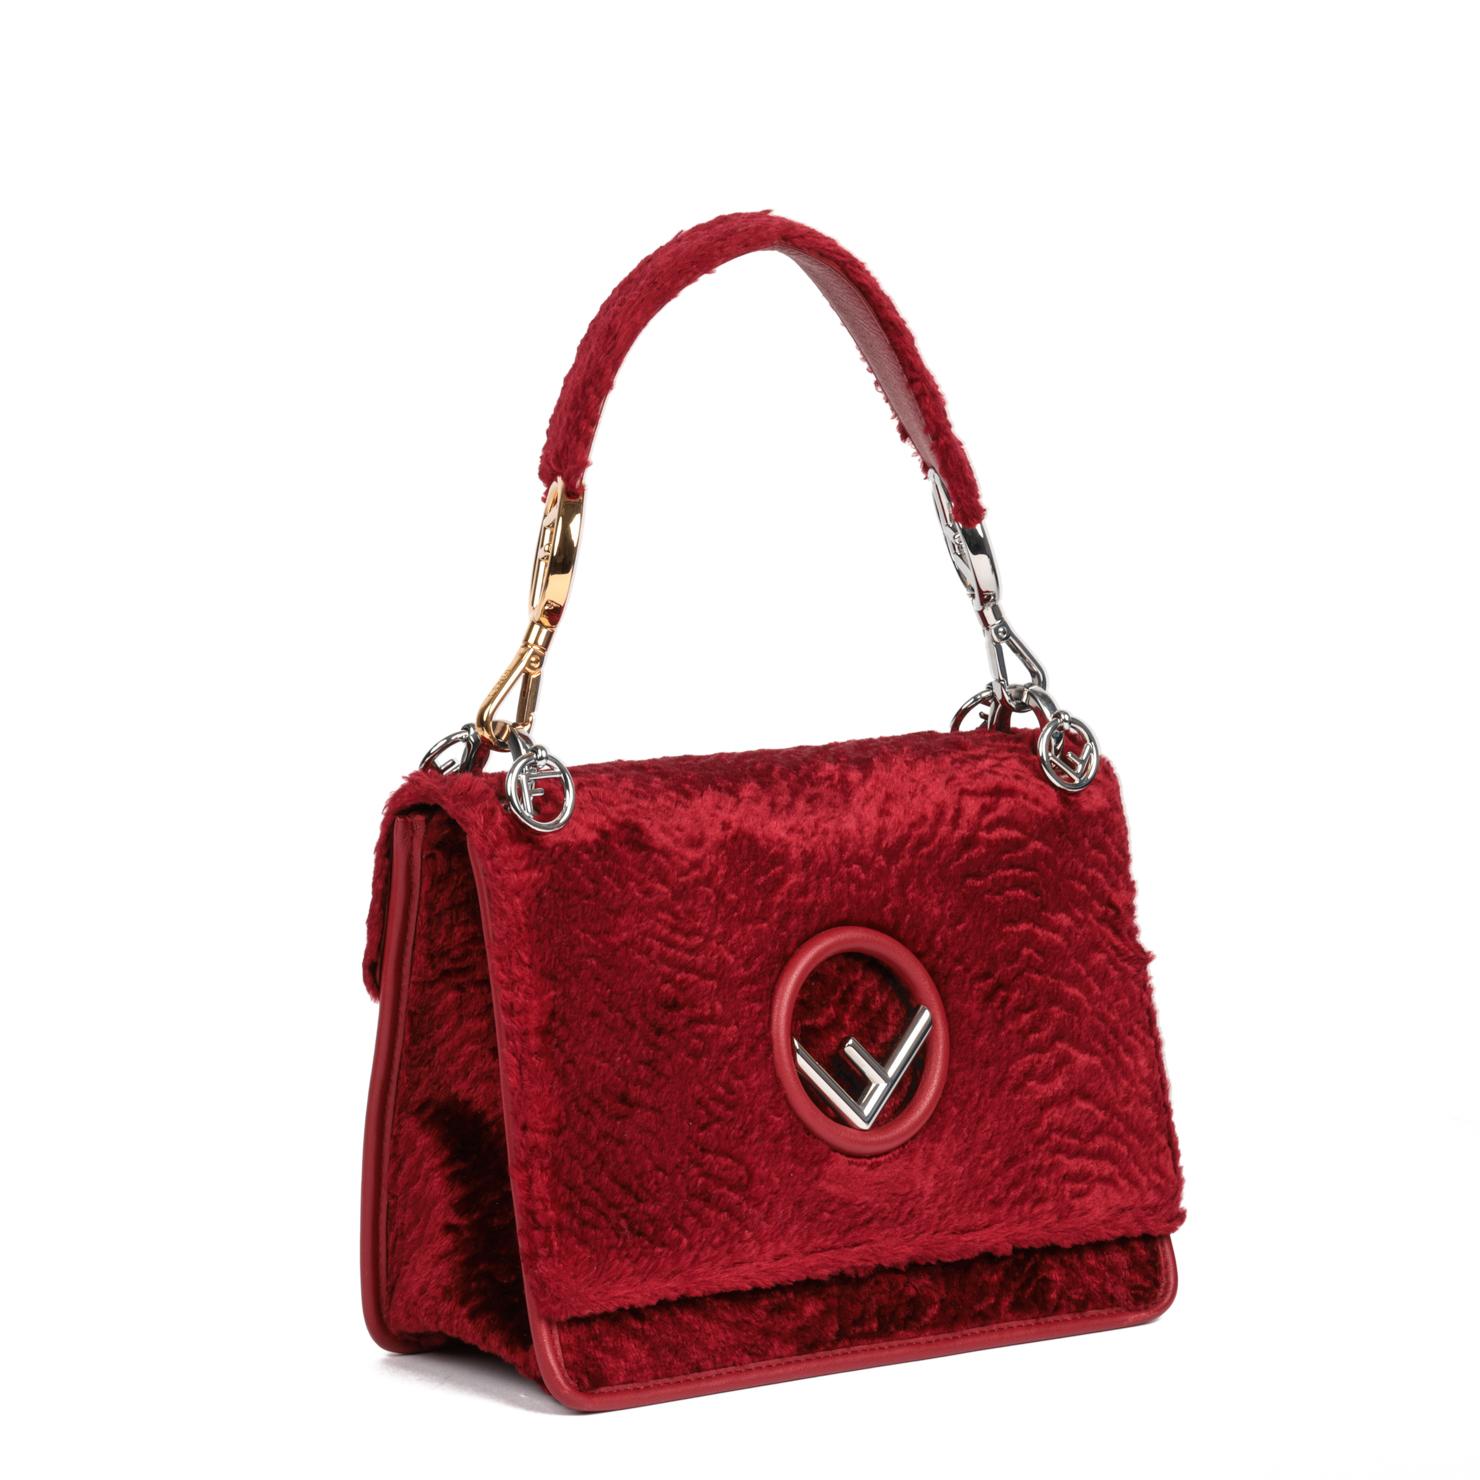 FENDI
Red Velvet Medium Kan I

Xupes Reference: CB894
Age (Circa): 2017
Accompanied By: Fendi Dust Bag, Authenticity Card
Authenticity Details: Date Stamp (Made in Italy)
Gender: Ladies
Type: Top Handle, Shoulder

Colour: Red
Hardware: Silver,